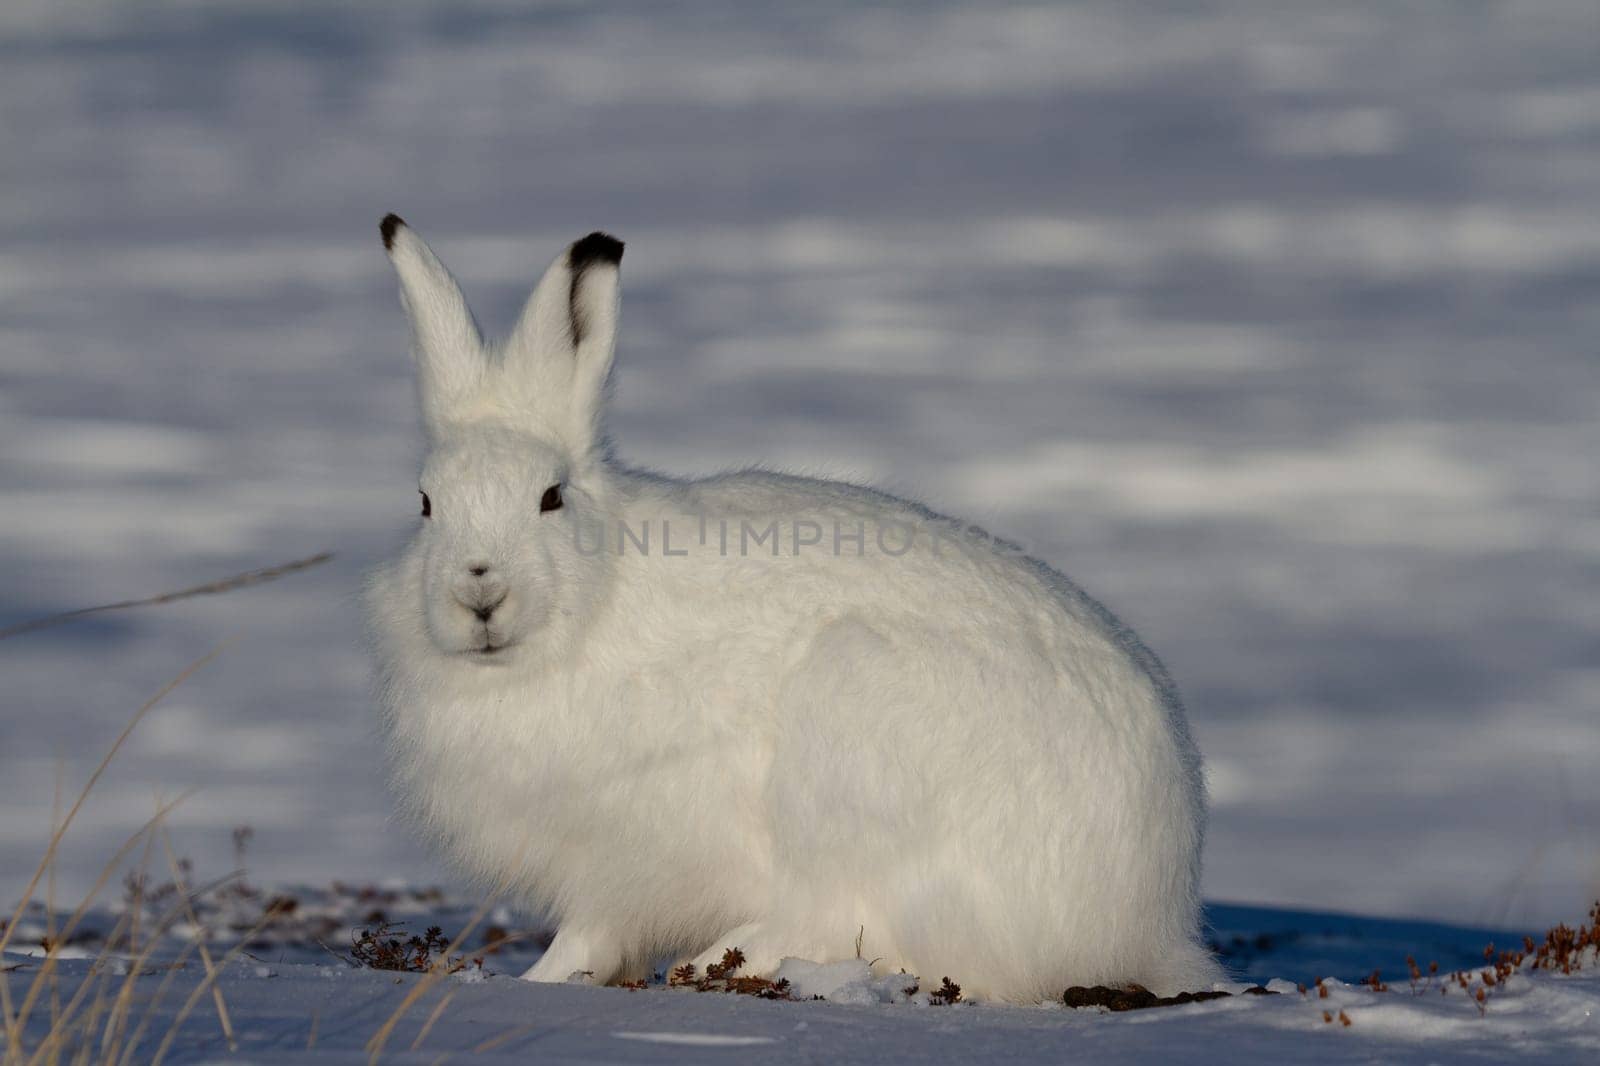 Arctic hare in winter coat staring towards the side with snow in the background by Granchinho